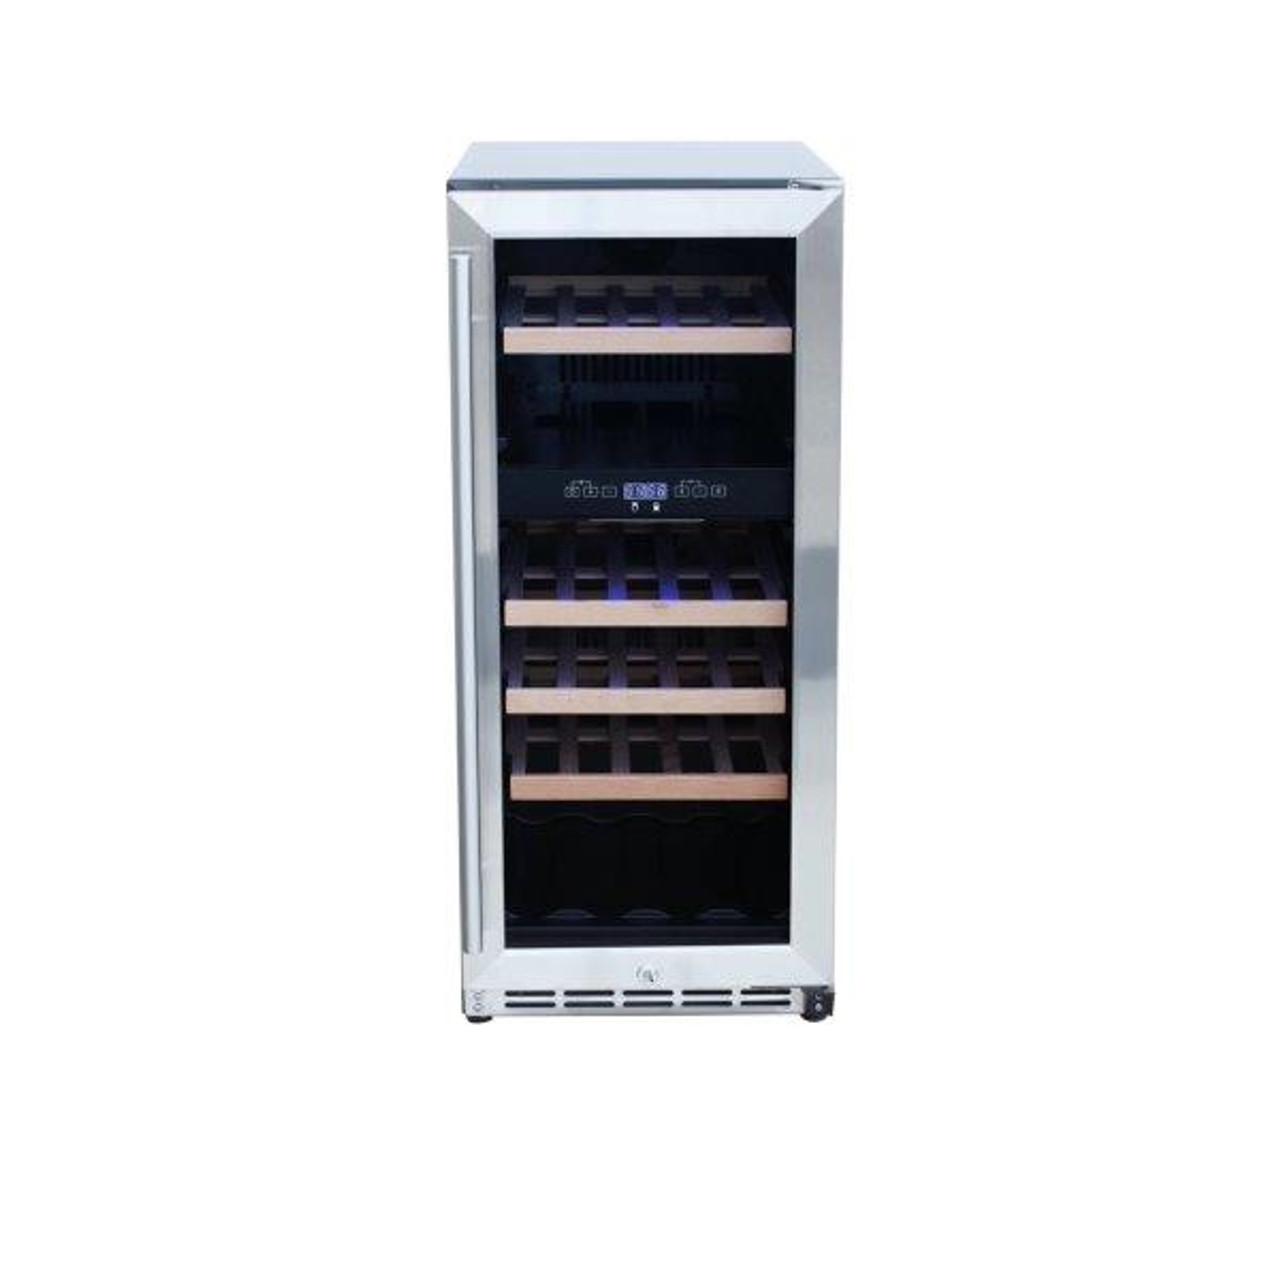 https://cdn11.bigcommerce.com/s-3n1nnt5qyw/images/stencil/1280x1280/products/24756/27260/rcs-stainless-steel-wine-cooler-refrigerator-with-15-glass-window-front-model-rwc1-24__22456.1629771559.jpg?c=1